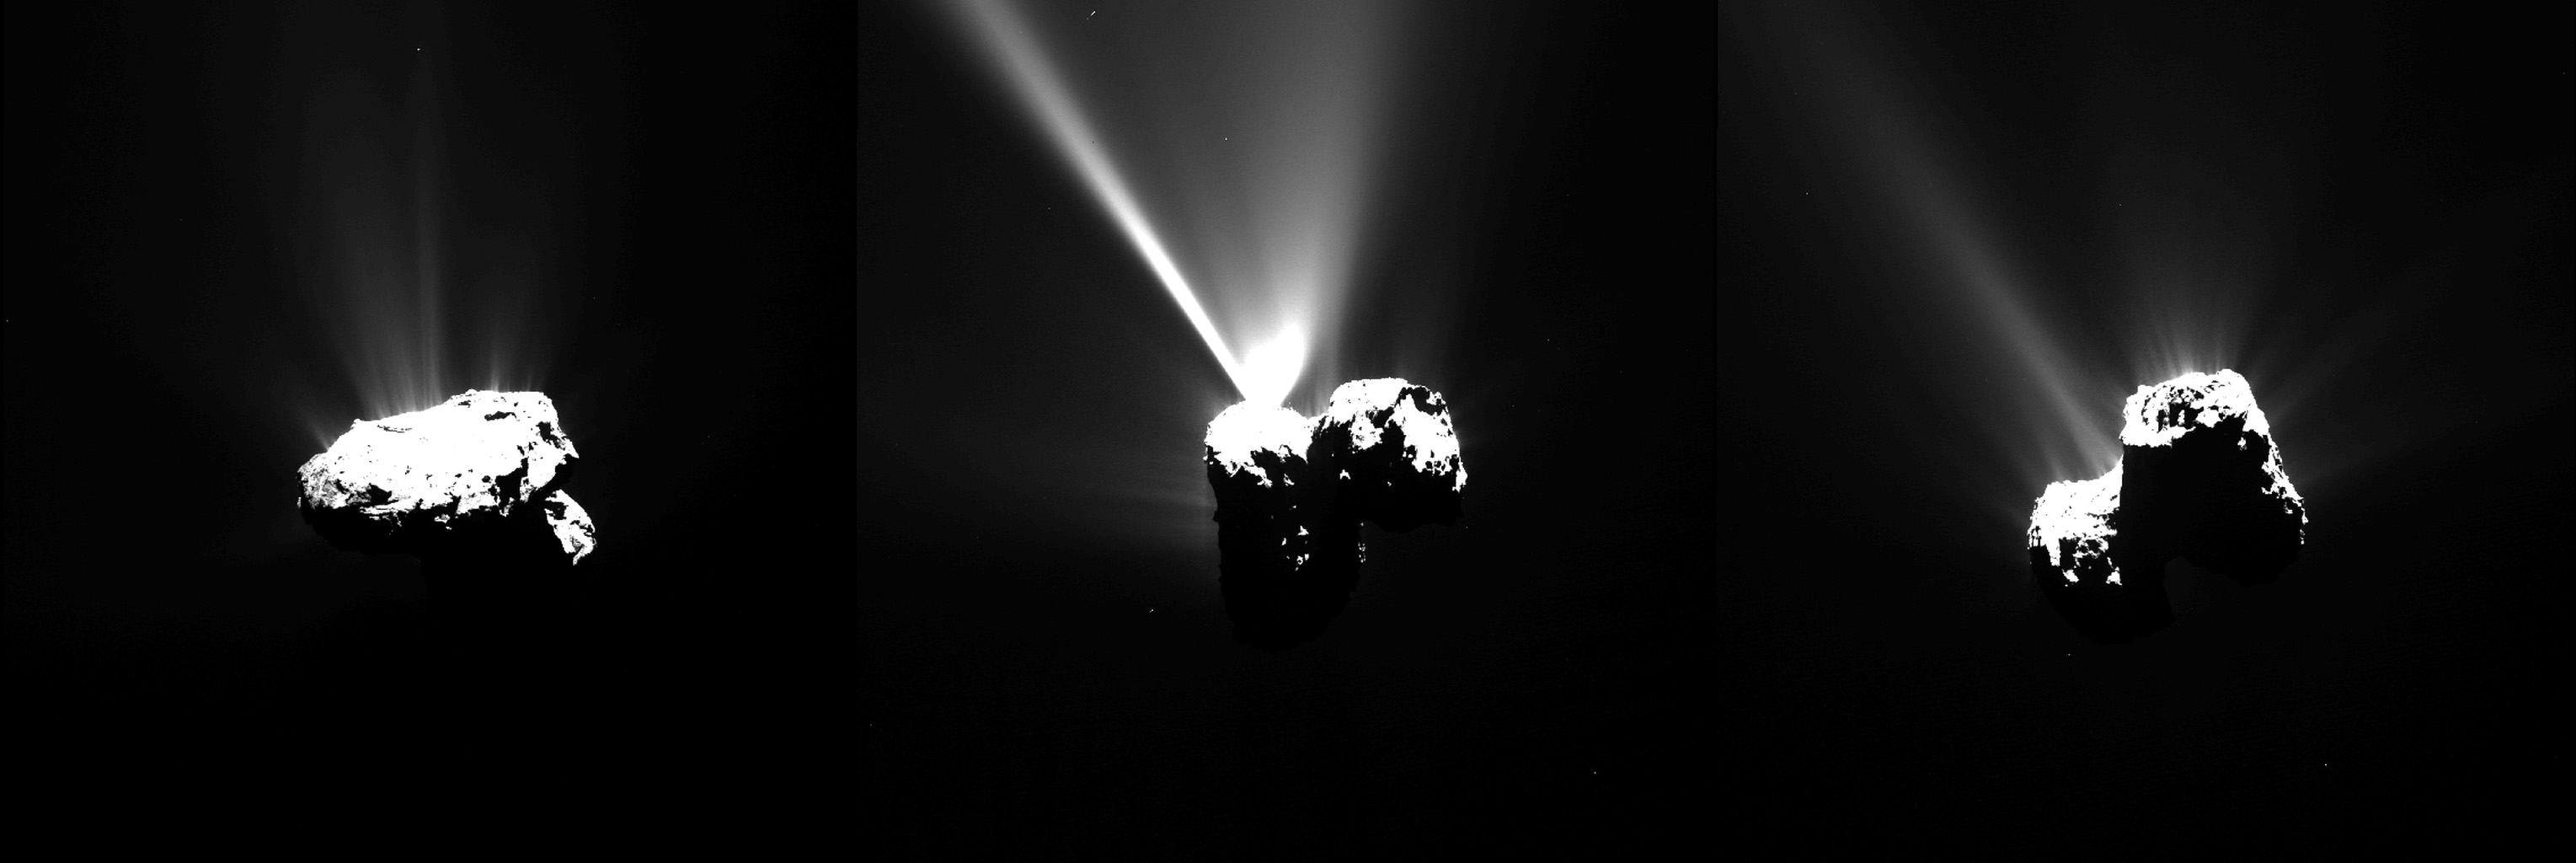 From ESA: "This series of images of Comet 67P/Churyumov–Gerasimenko was captured by Rosetta’s OSIRIS narrow-angle camera on 12 August 2015, just a few hours before the comet reached the closest point to the Sun along its 6.5-year orbit, or perihelion." Image Credit: ESA/Rosetta/MPS for OSIRIS Team MPS/UPD/LAM/IAA/SSO/INTA/UPM/DASP/IDA